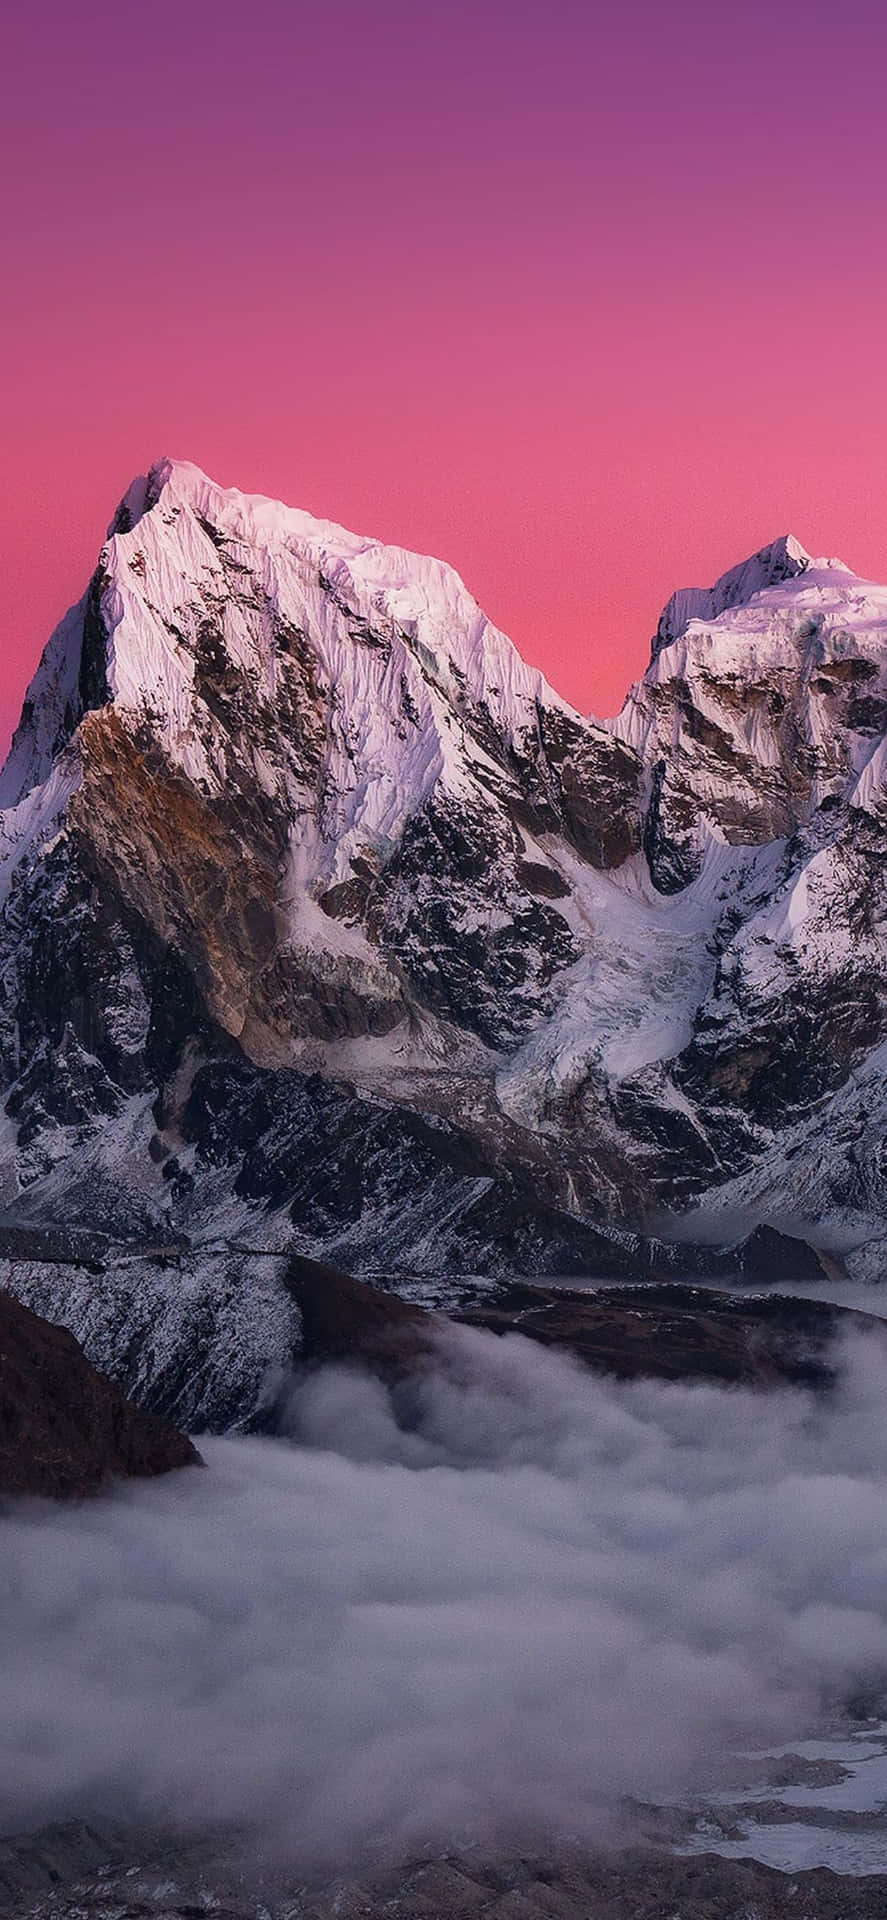 Majestic Mountain Landscape on Your iPhone Screen